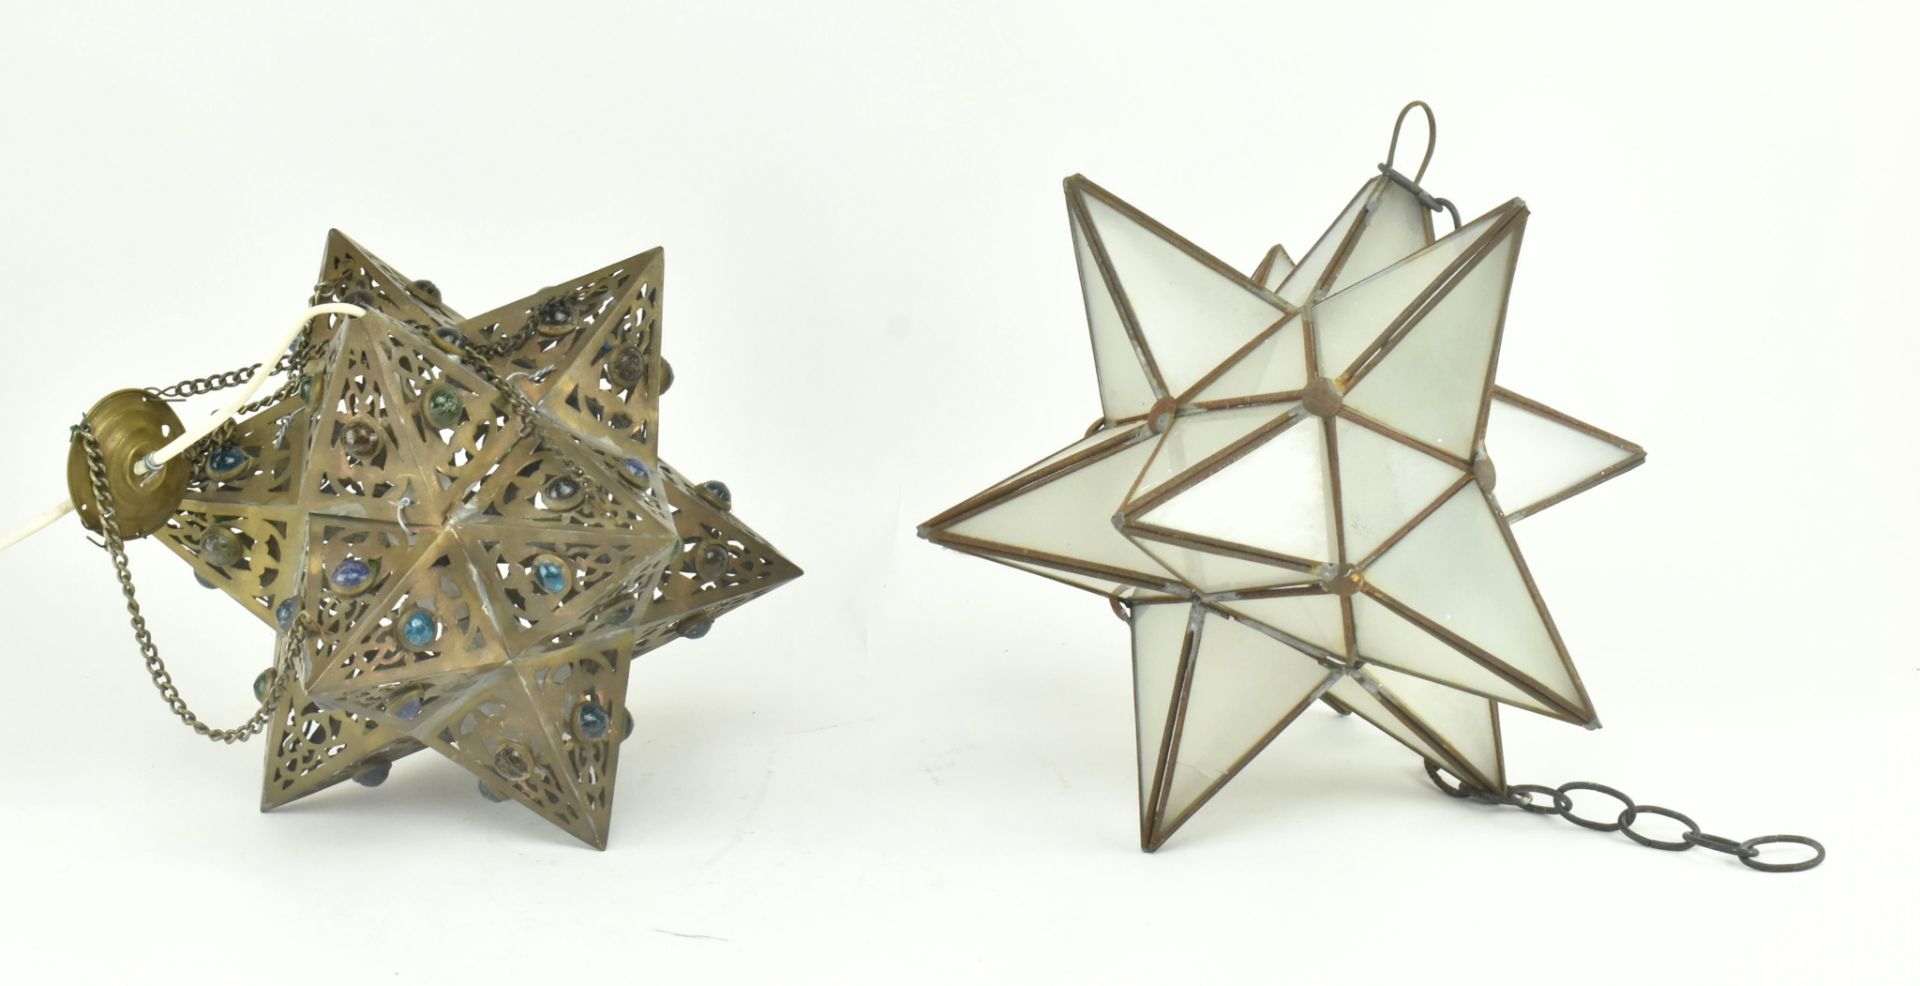 TWO VINTAGE STAR SHAPED MOROCCAN / INDIAN HANGING LIGHTS